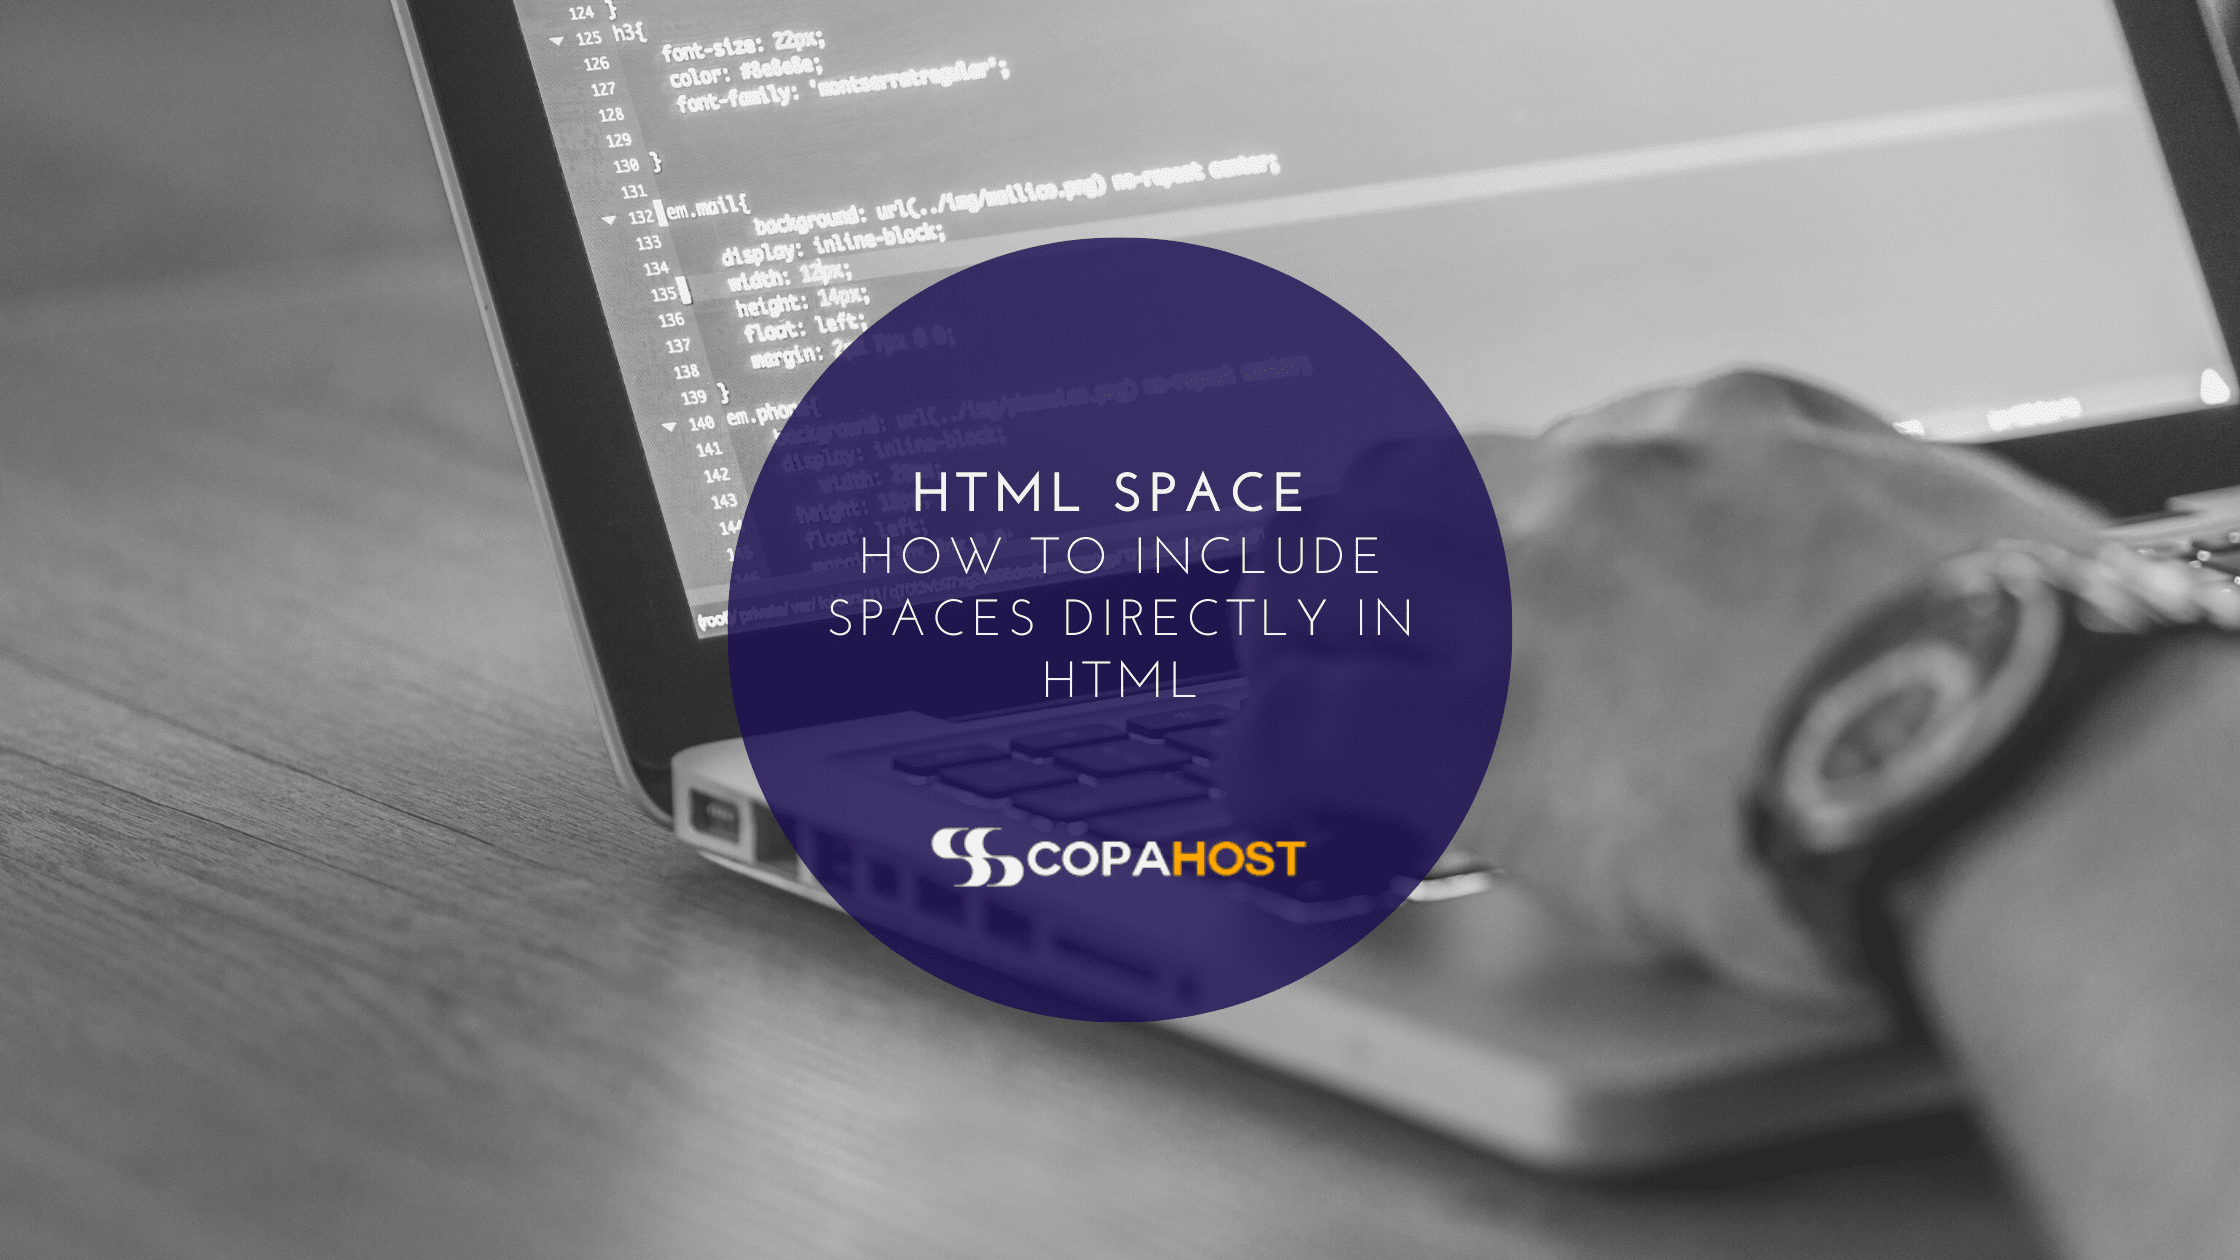 HTML Space: how to include spaces directly in HTML